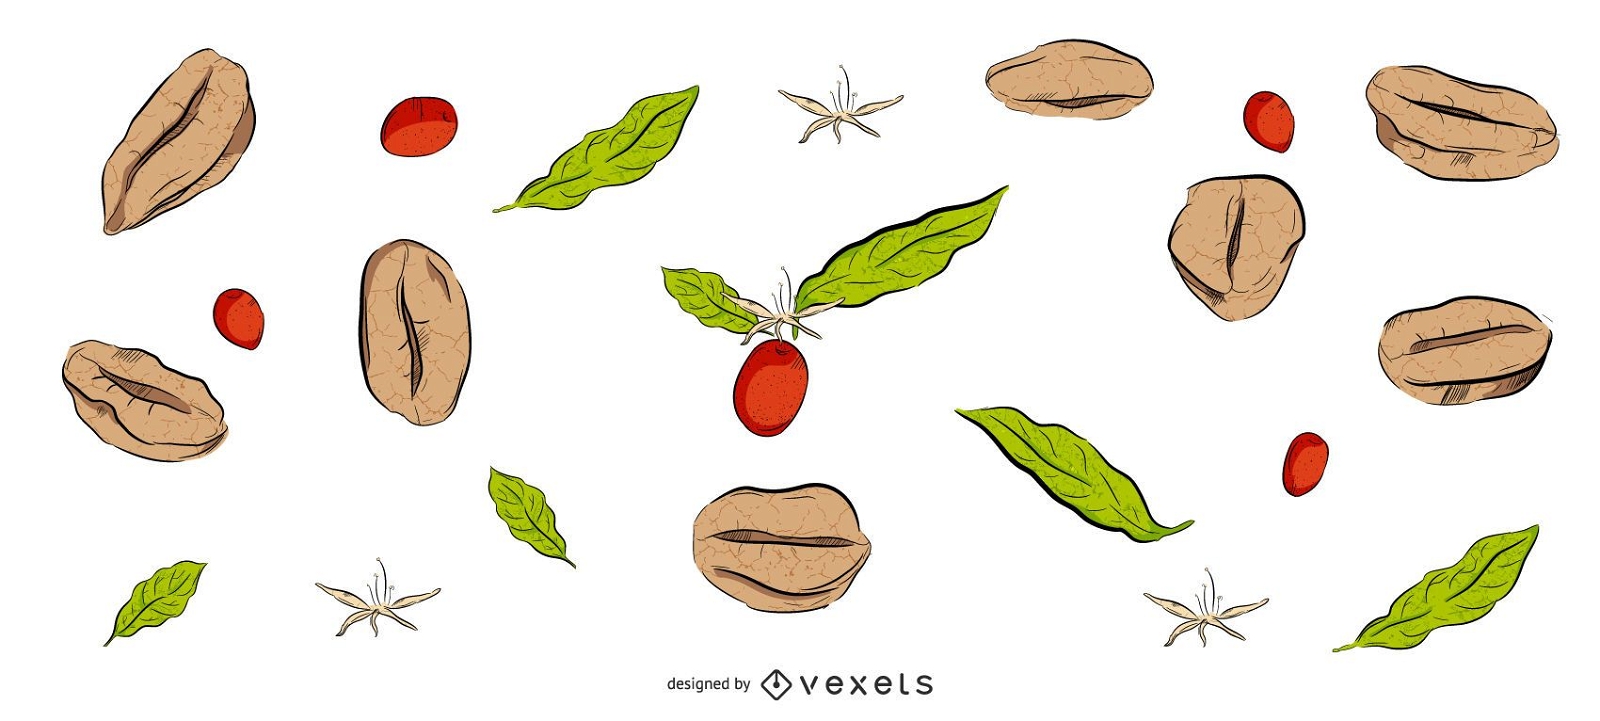 Coffee beans and leaves background design